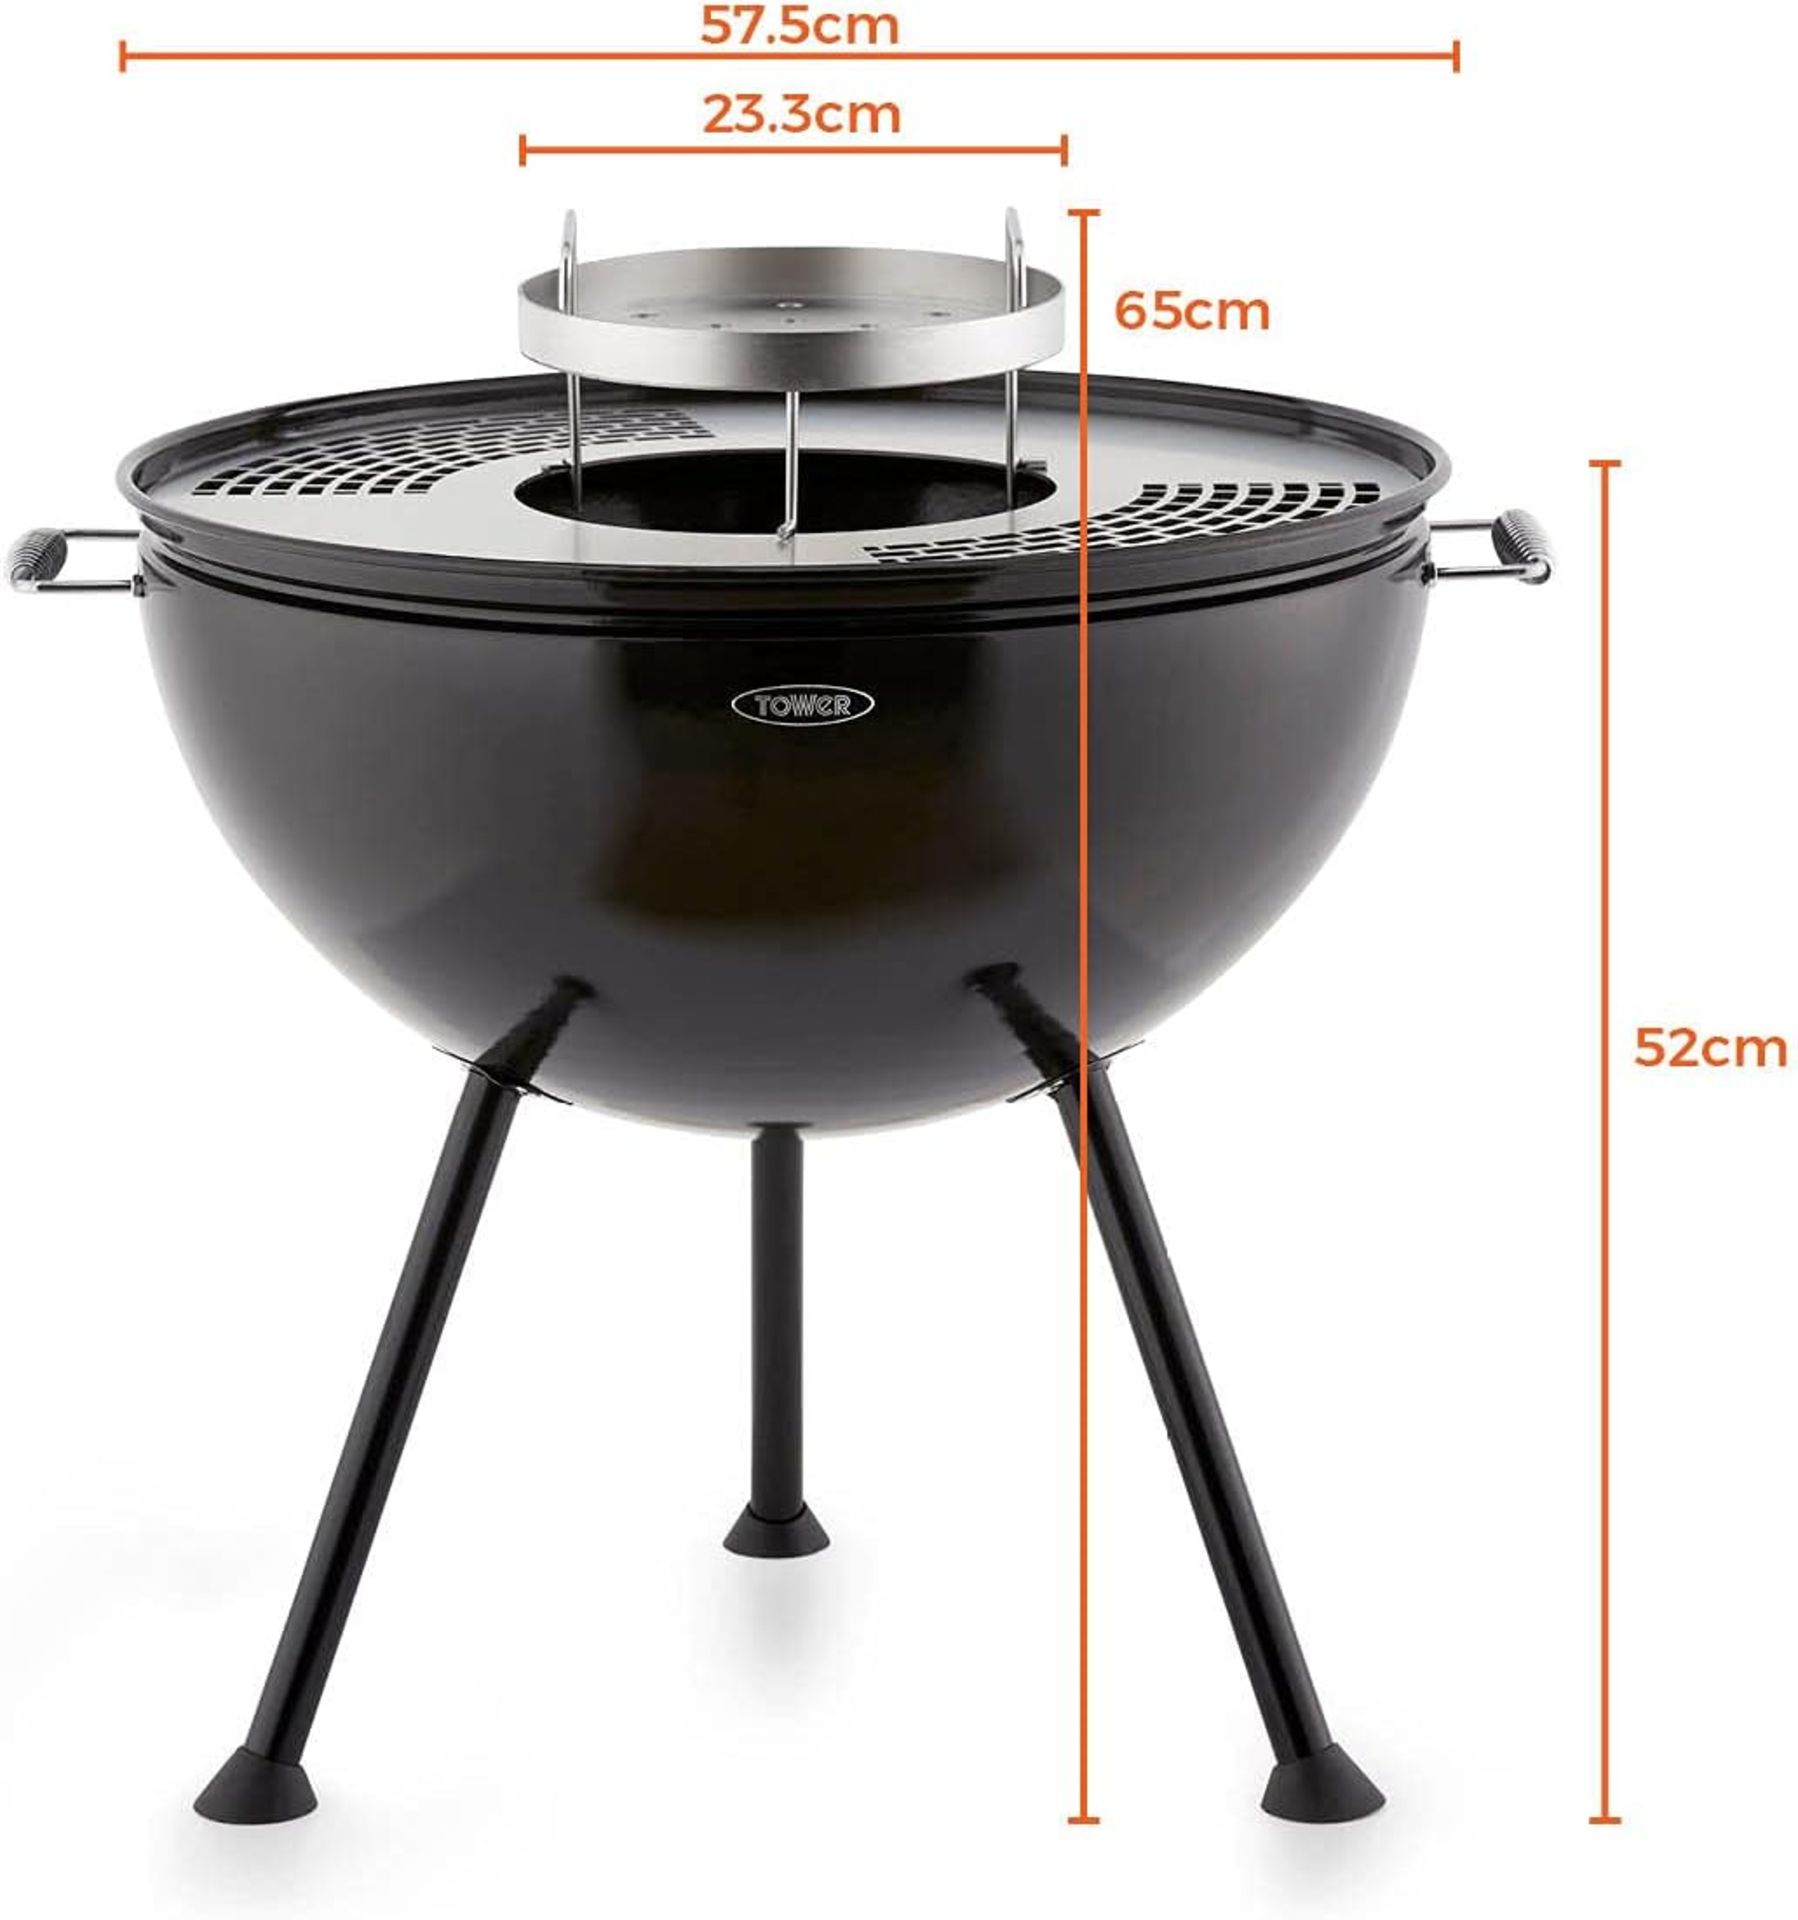 BRAND NEW Tower 2-in-1 Fire Pit and BBQ. RRP £159.99 EACH. Combining visual appeal and - Image 2 of 4